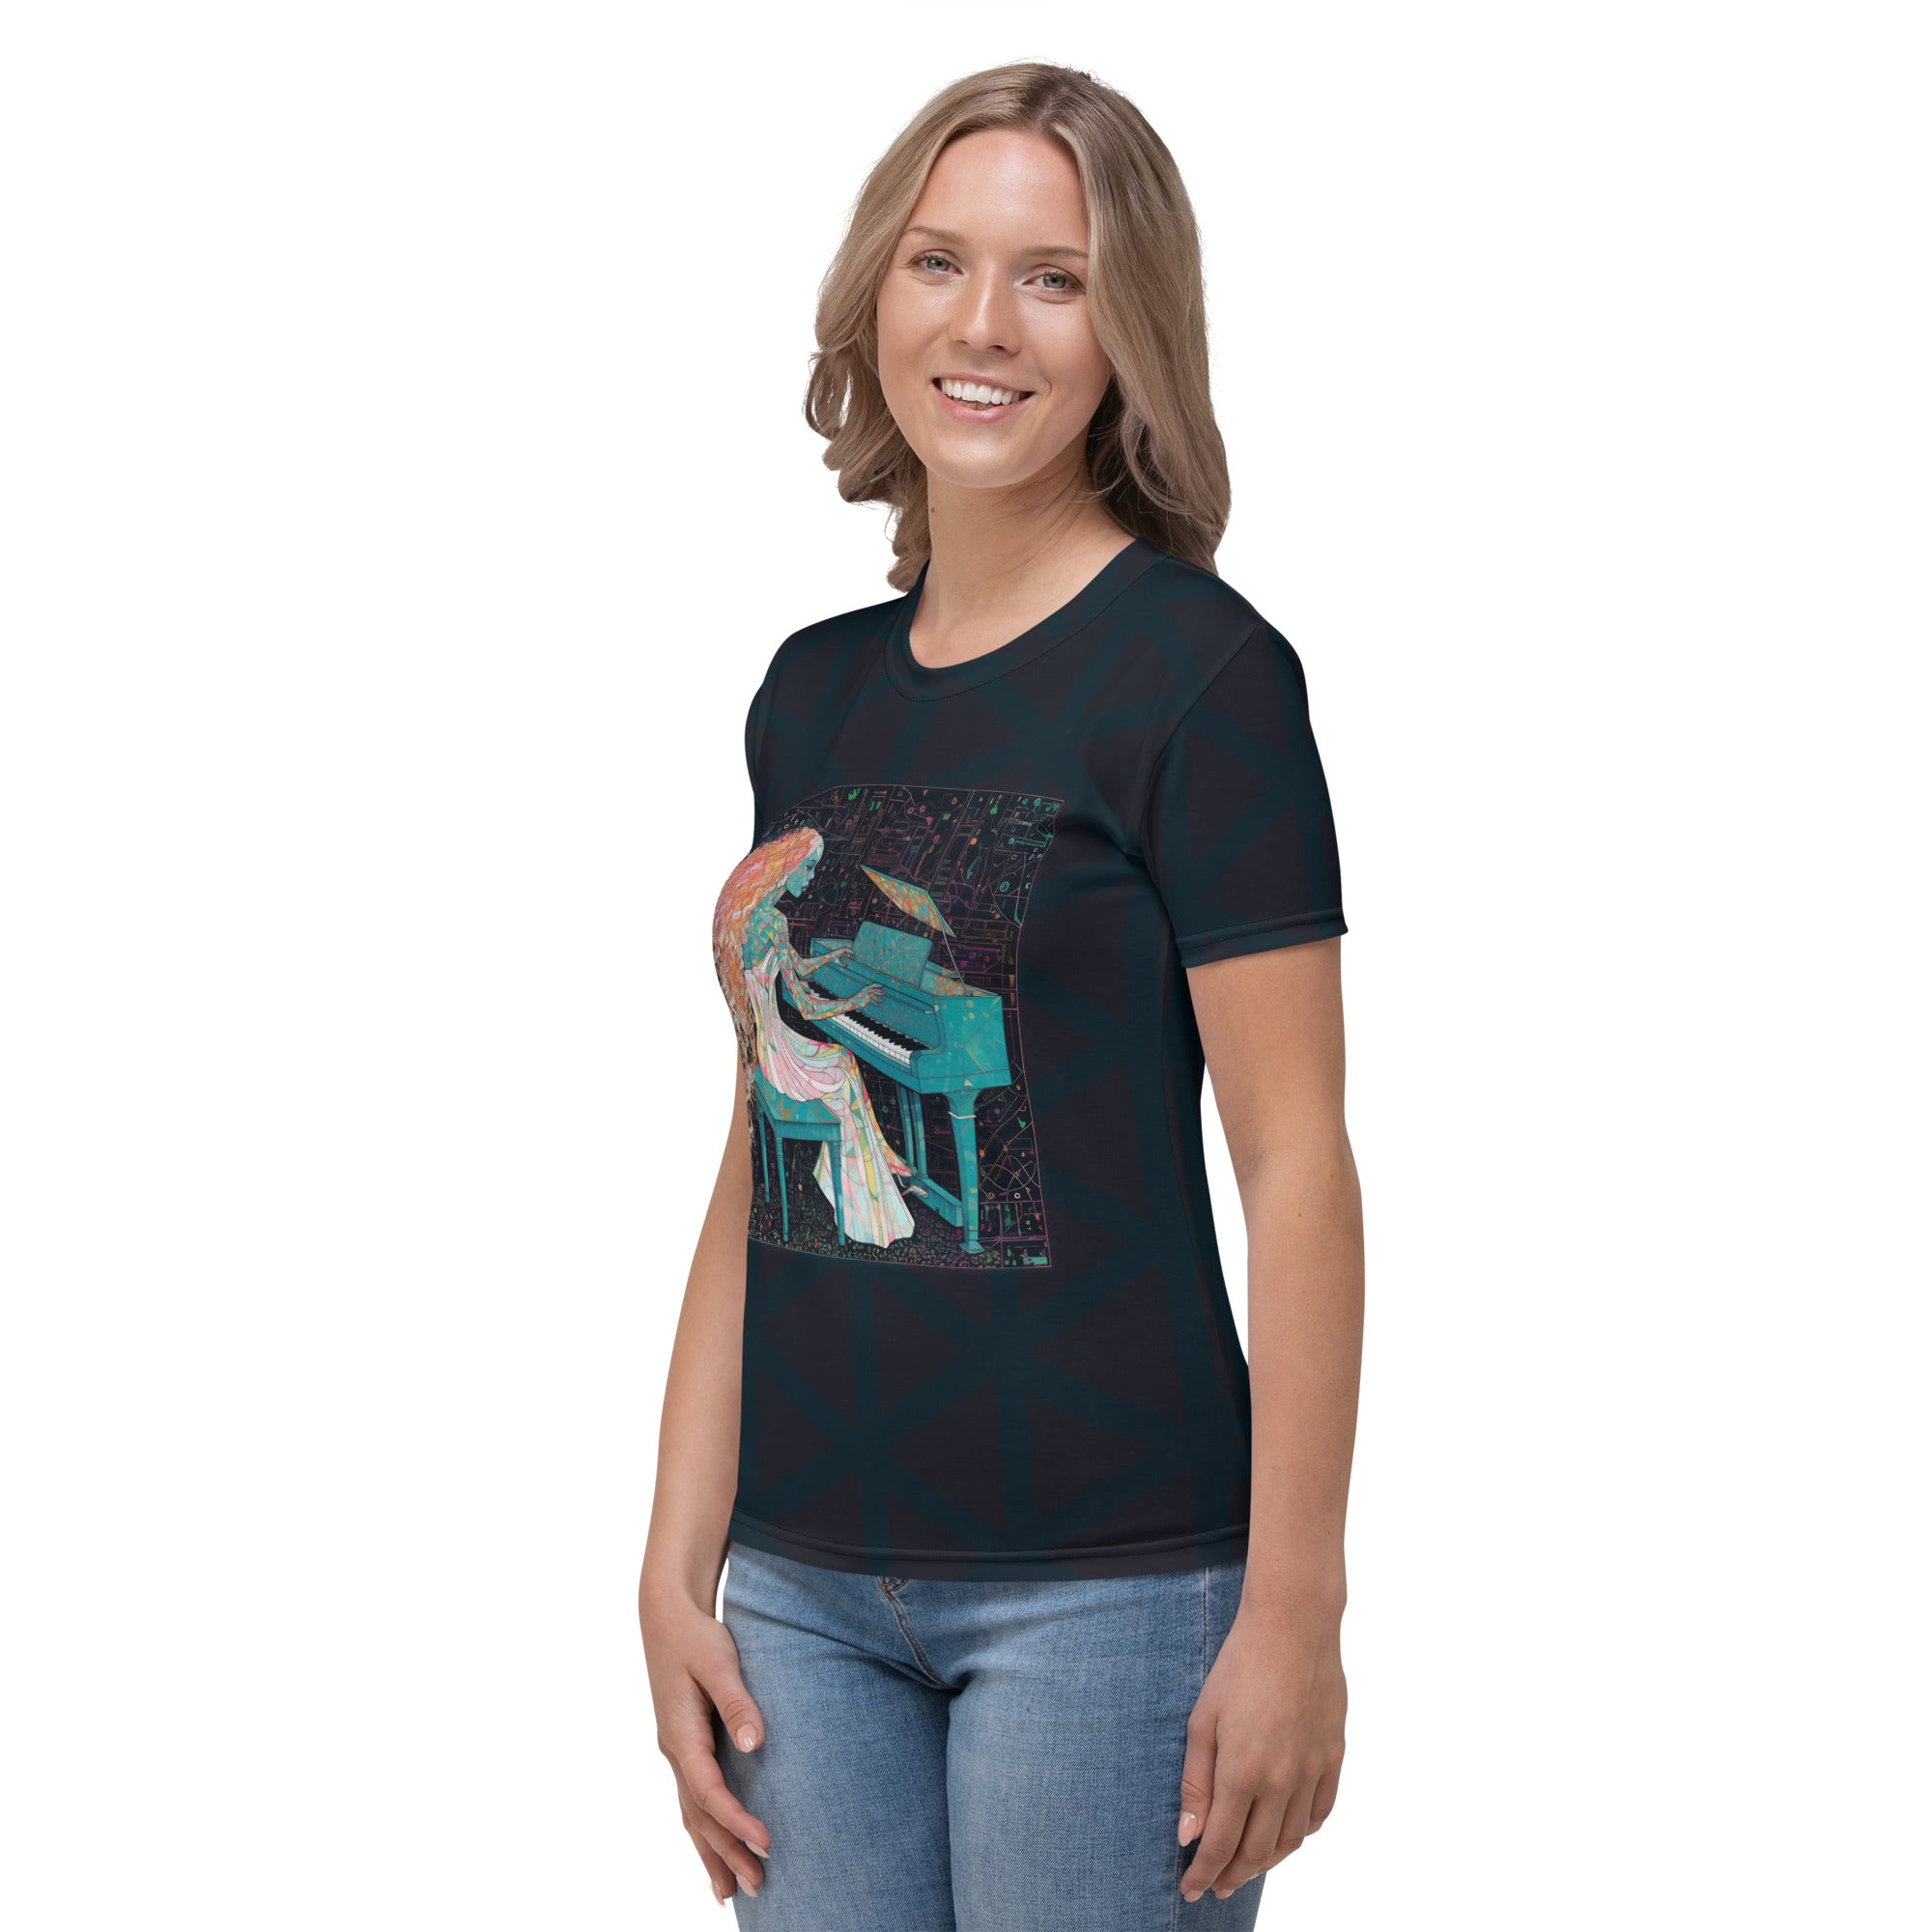 Casual women's tee with meadow and floral prints.